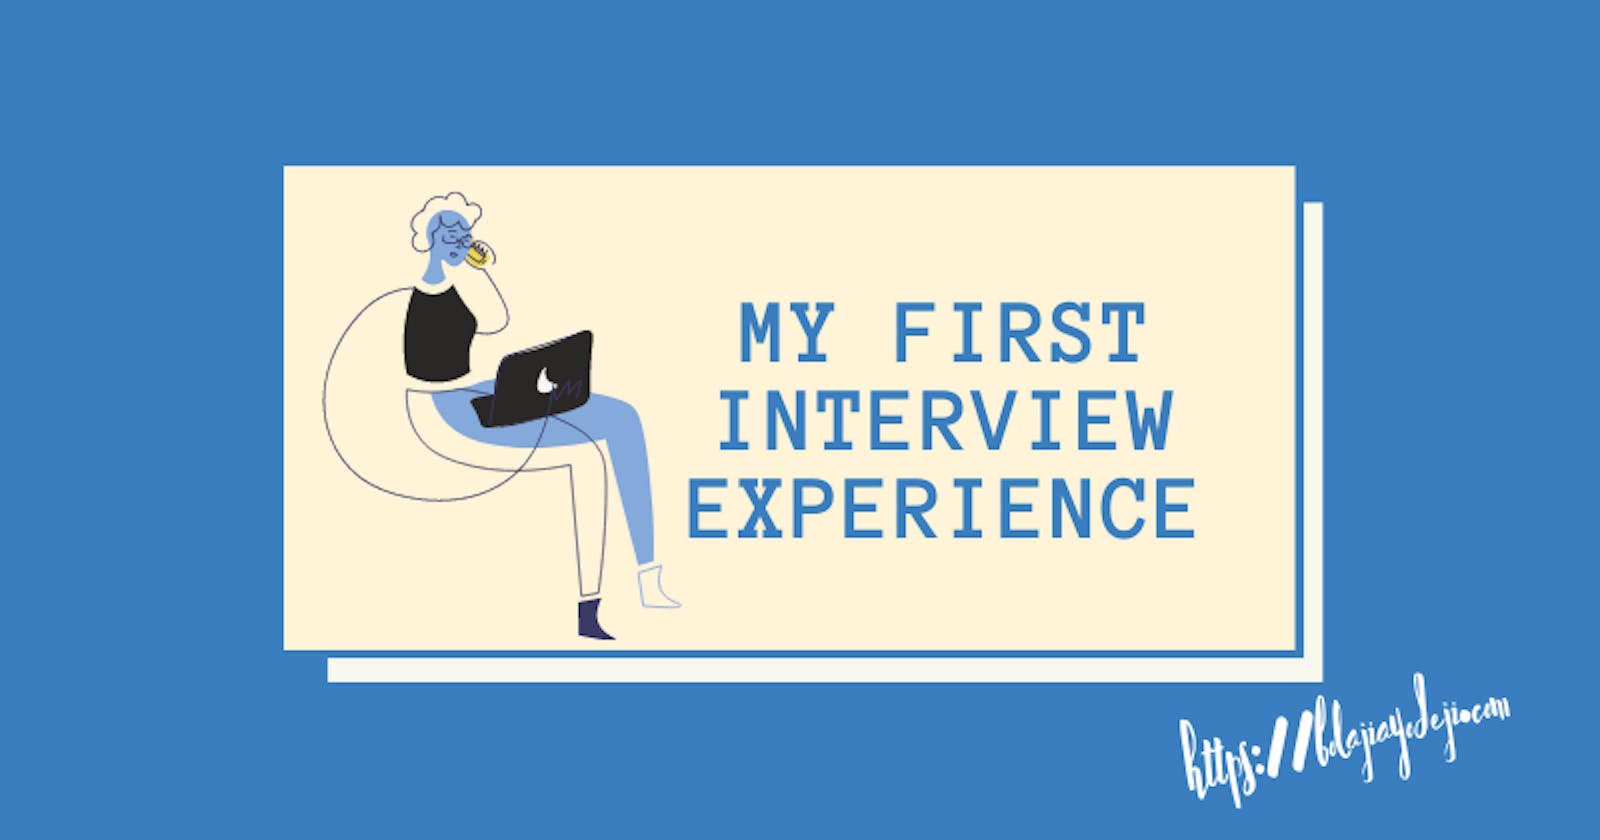 My First Interview Experience 👨🏾‍💻